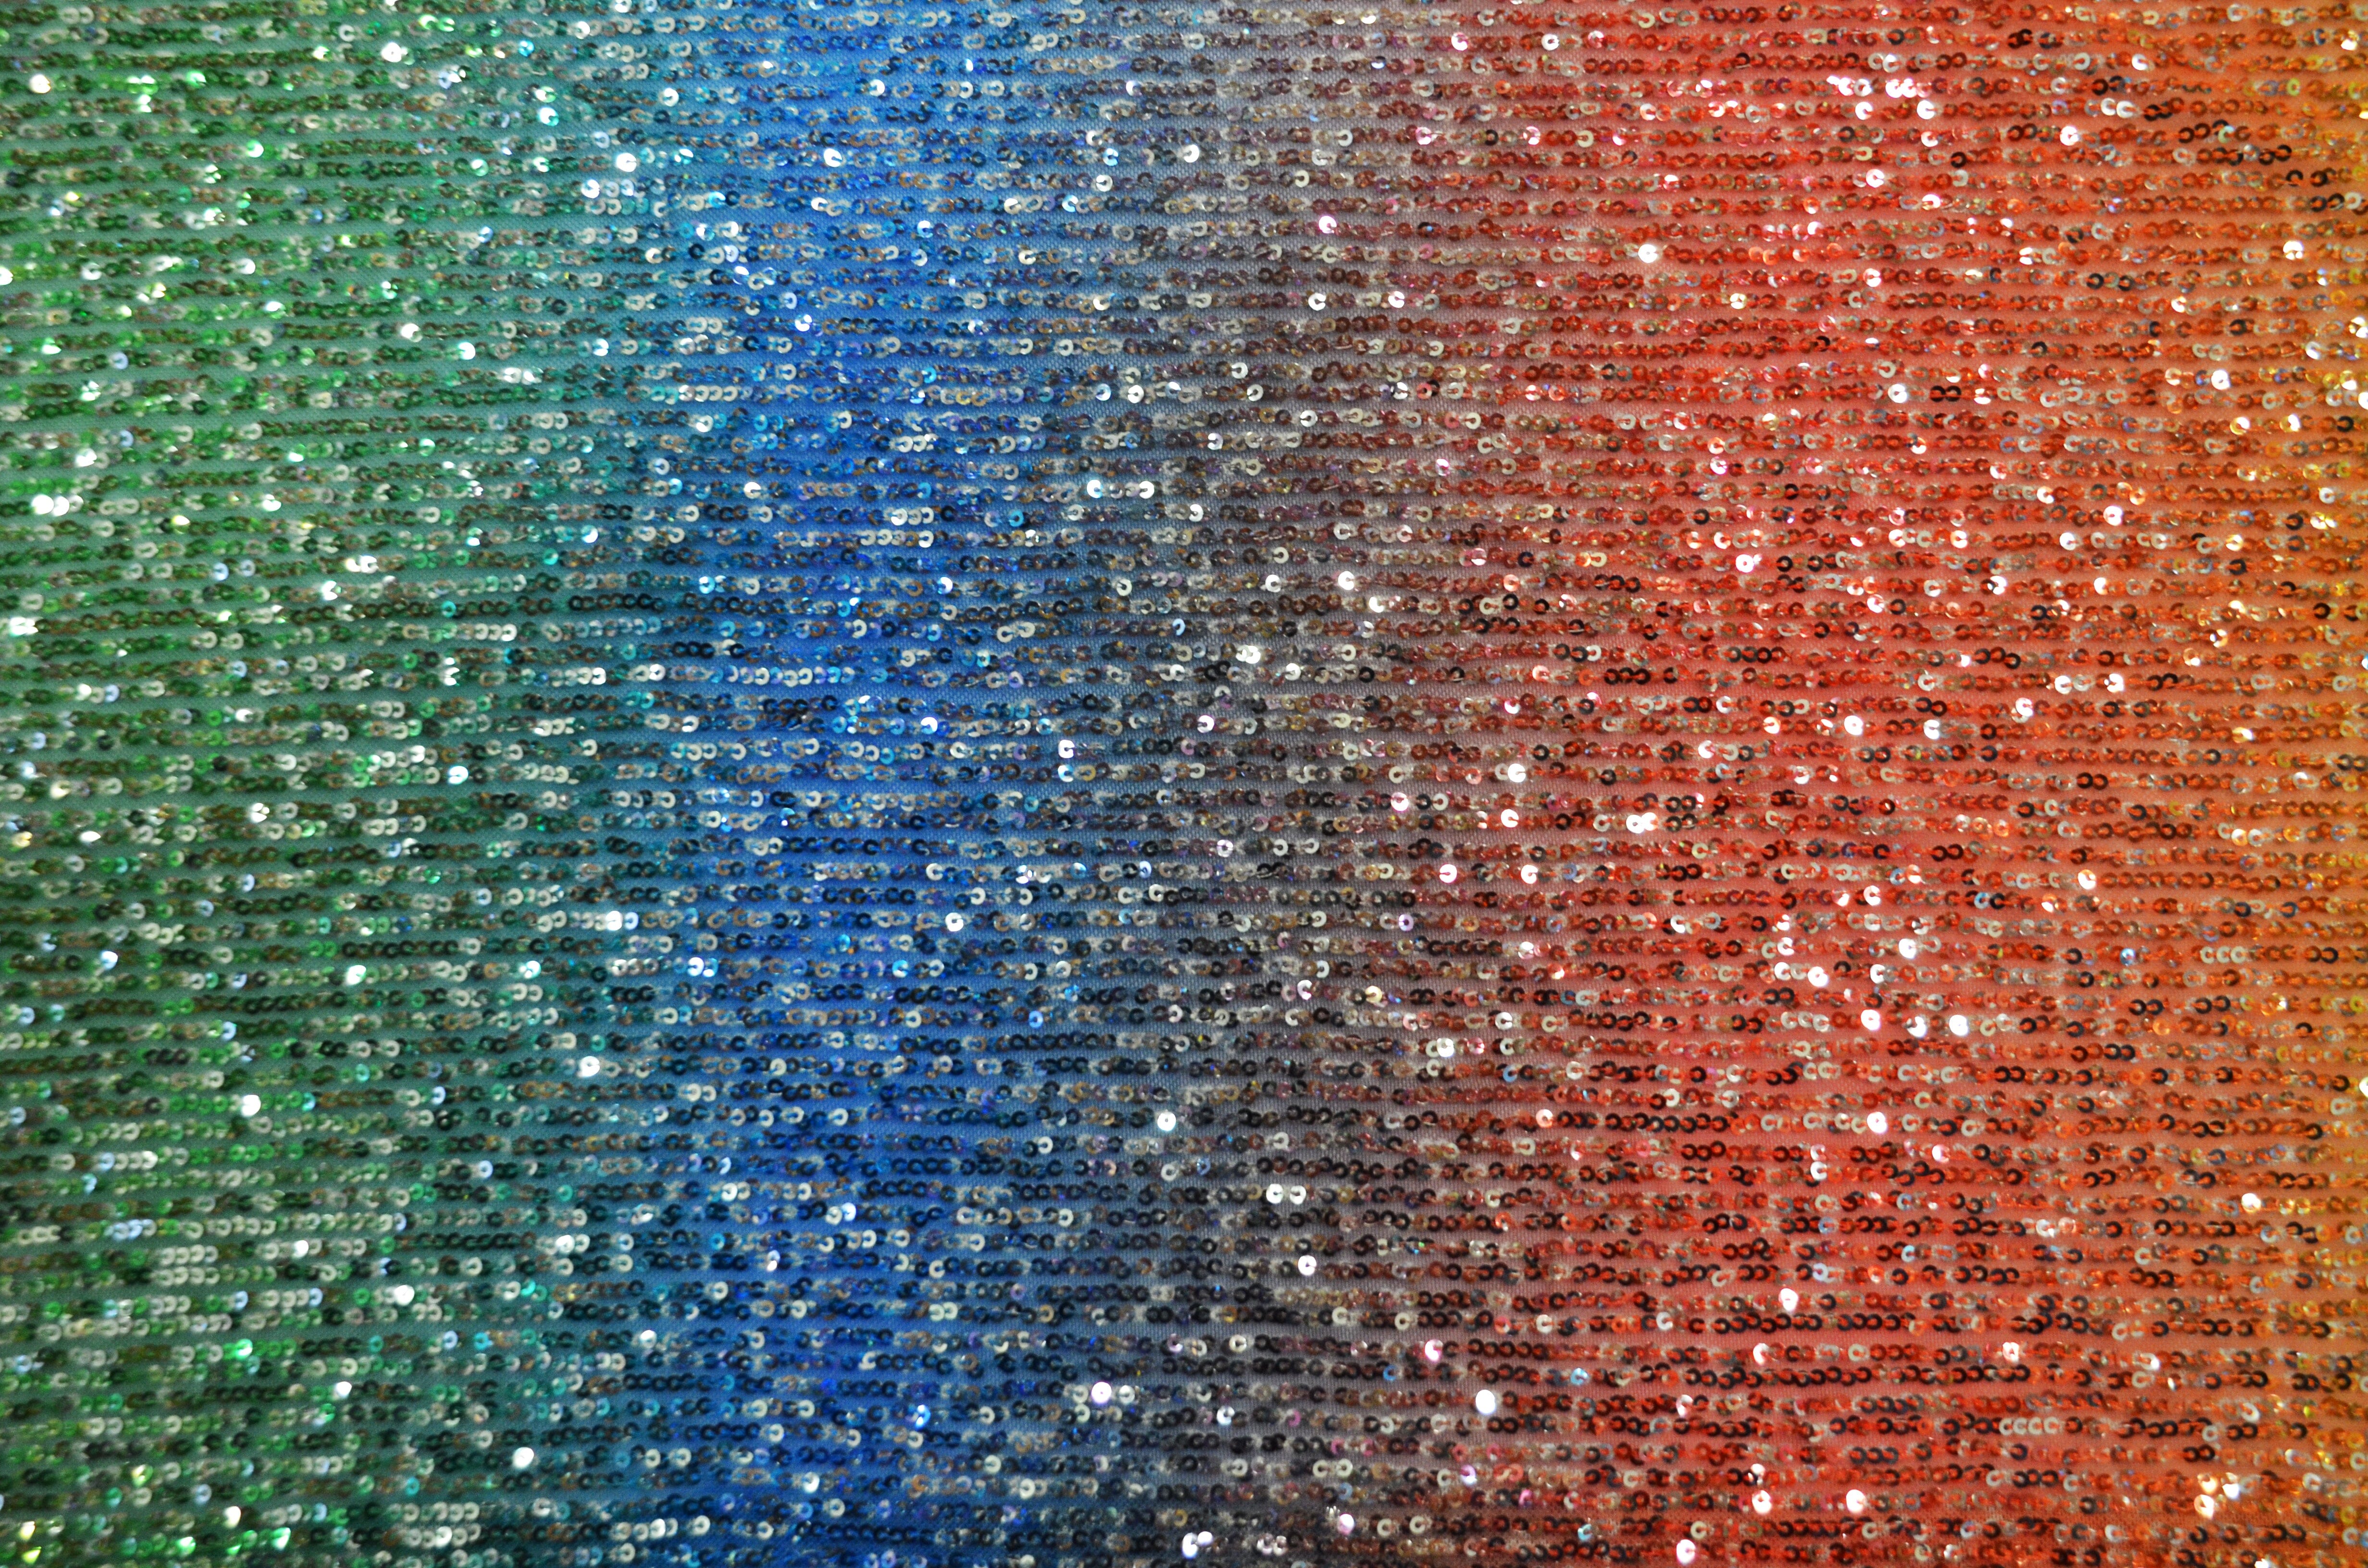 Rainbow Sequins Fabric | Multi Color Sequins Rainbow on Mesh Fabric | Mermaid Mesh Sequins Fabric | Ombre Sequins Fabric by the Yard | Fabric mytextilefabric 